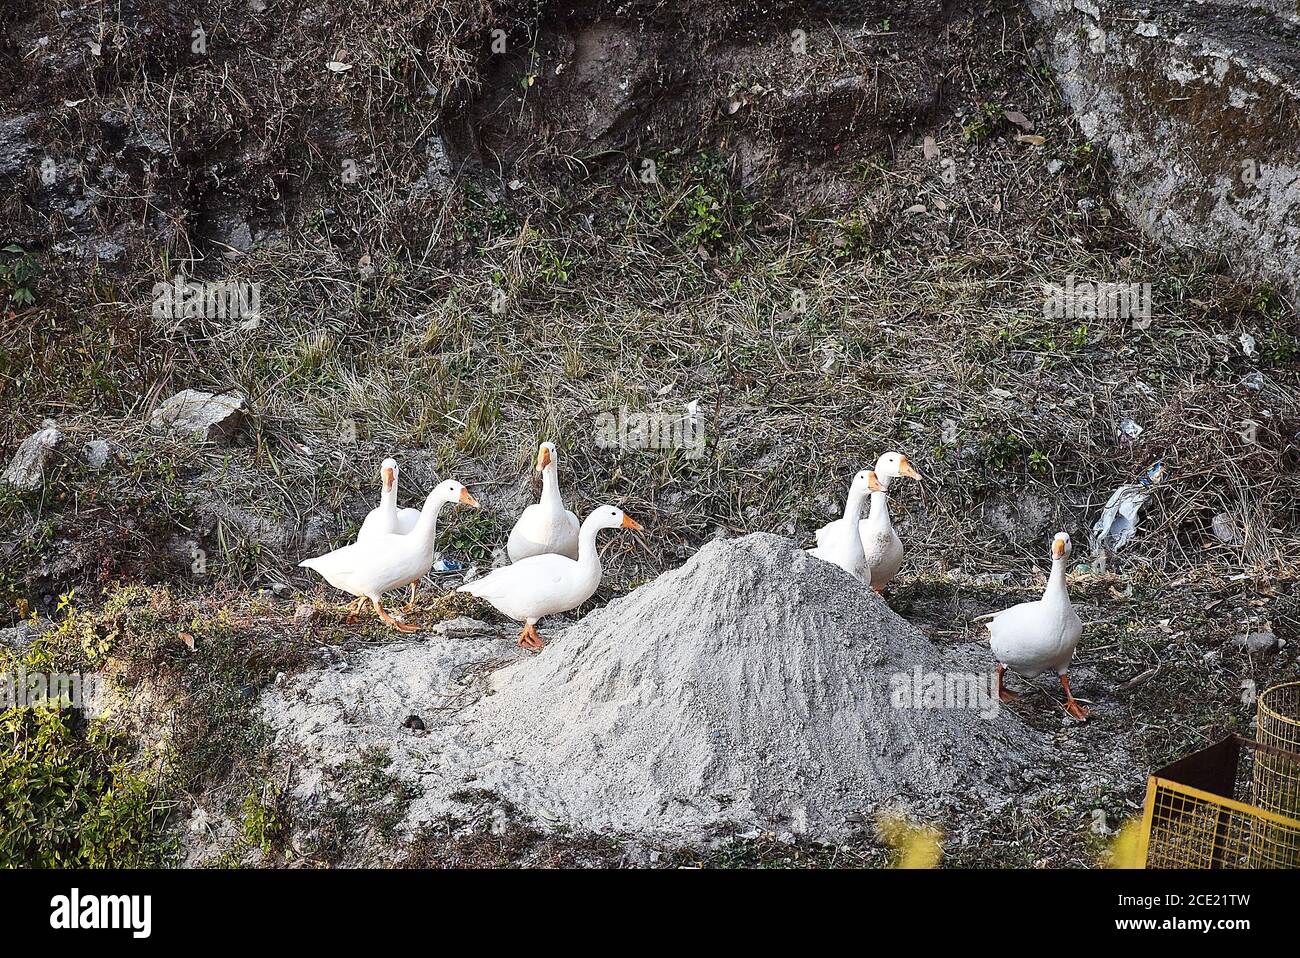 Group of Indian Runner ducks on a road. Landsdown, India Stock Photo